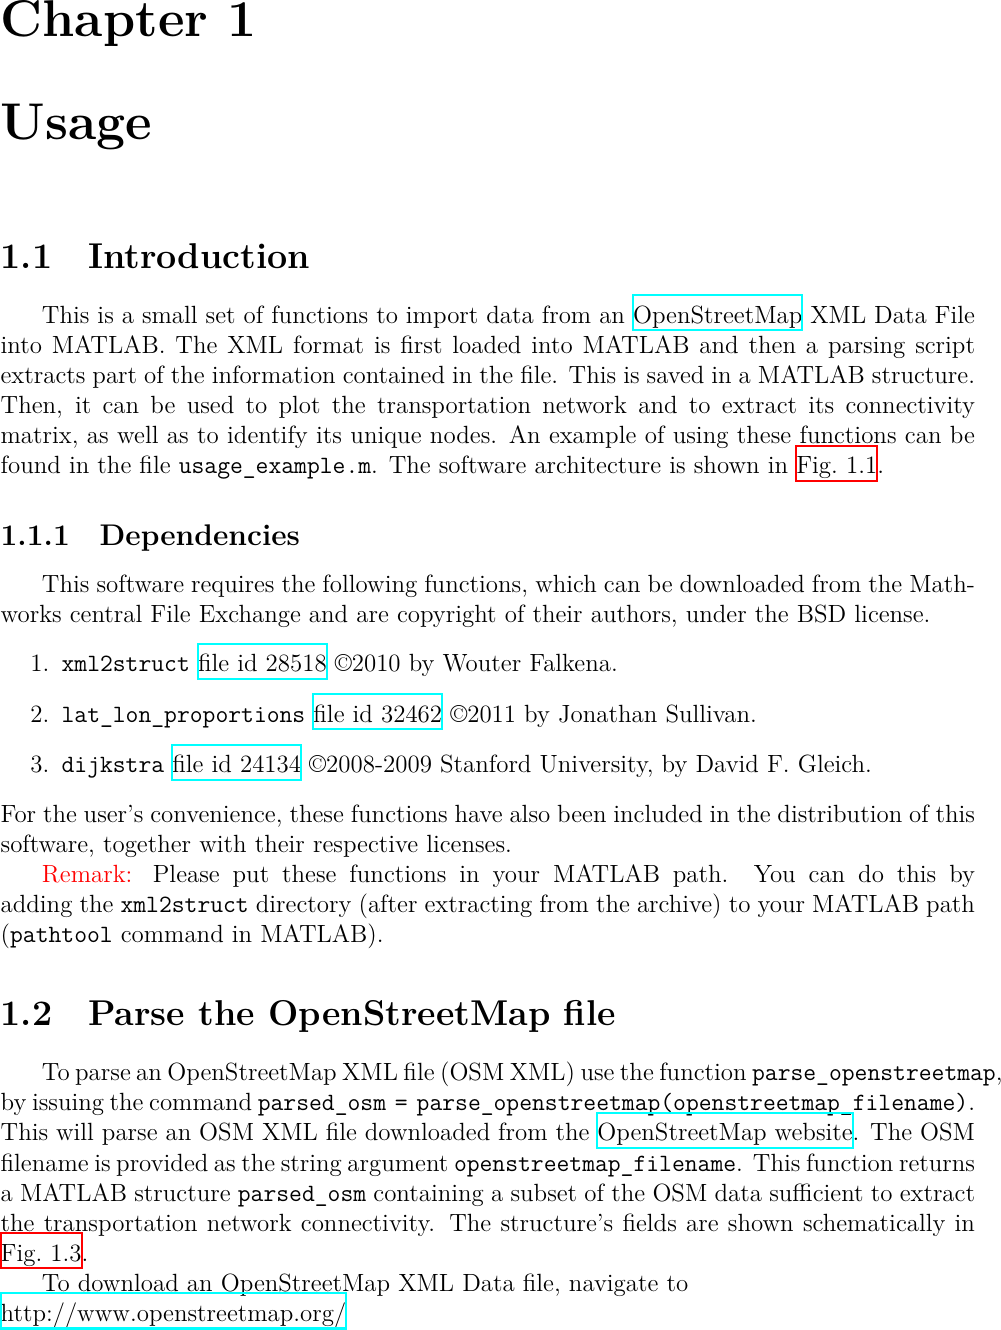 Page 3 of 8 - OpenStreetMap Toolbox For MATLAB V.0.1 User Manual V0.2